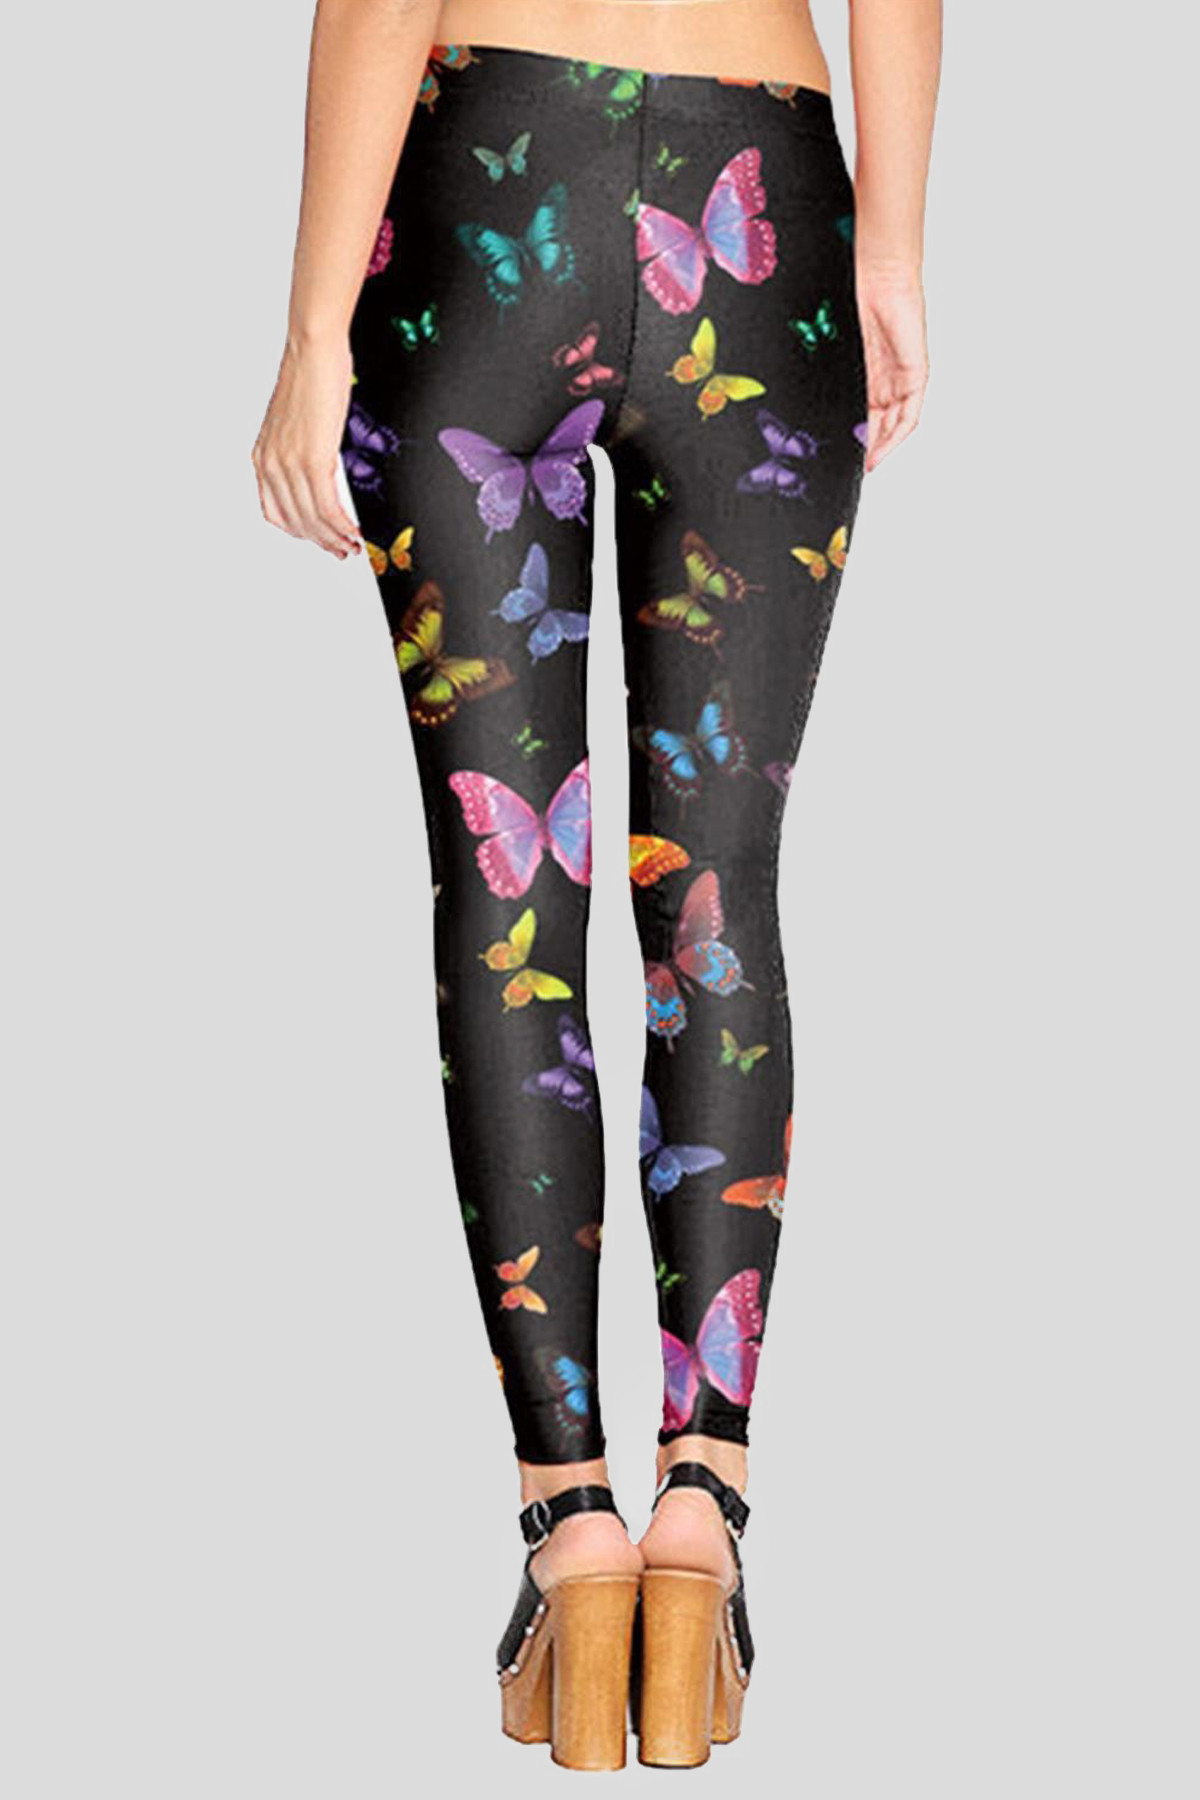 LINA Butterfly Print Skinny Stretchy Leggings 8-14 - Trousers